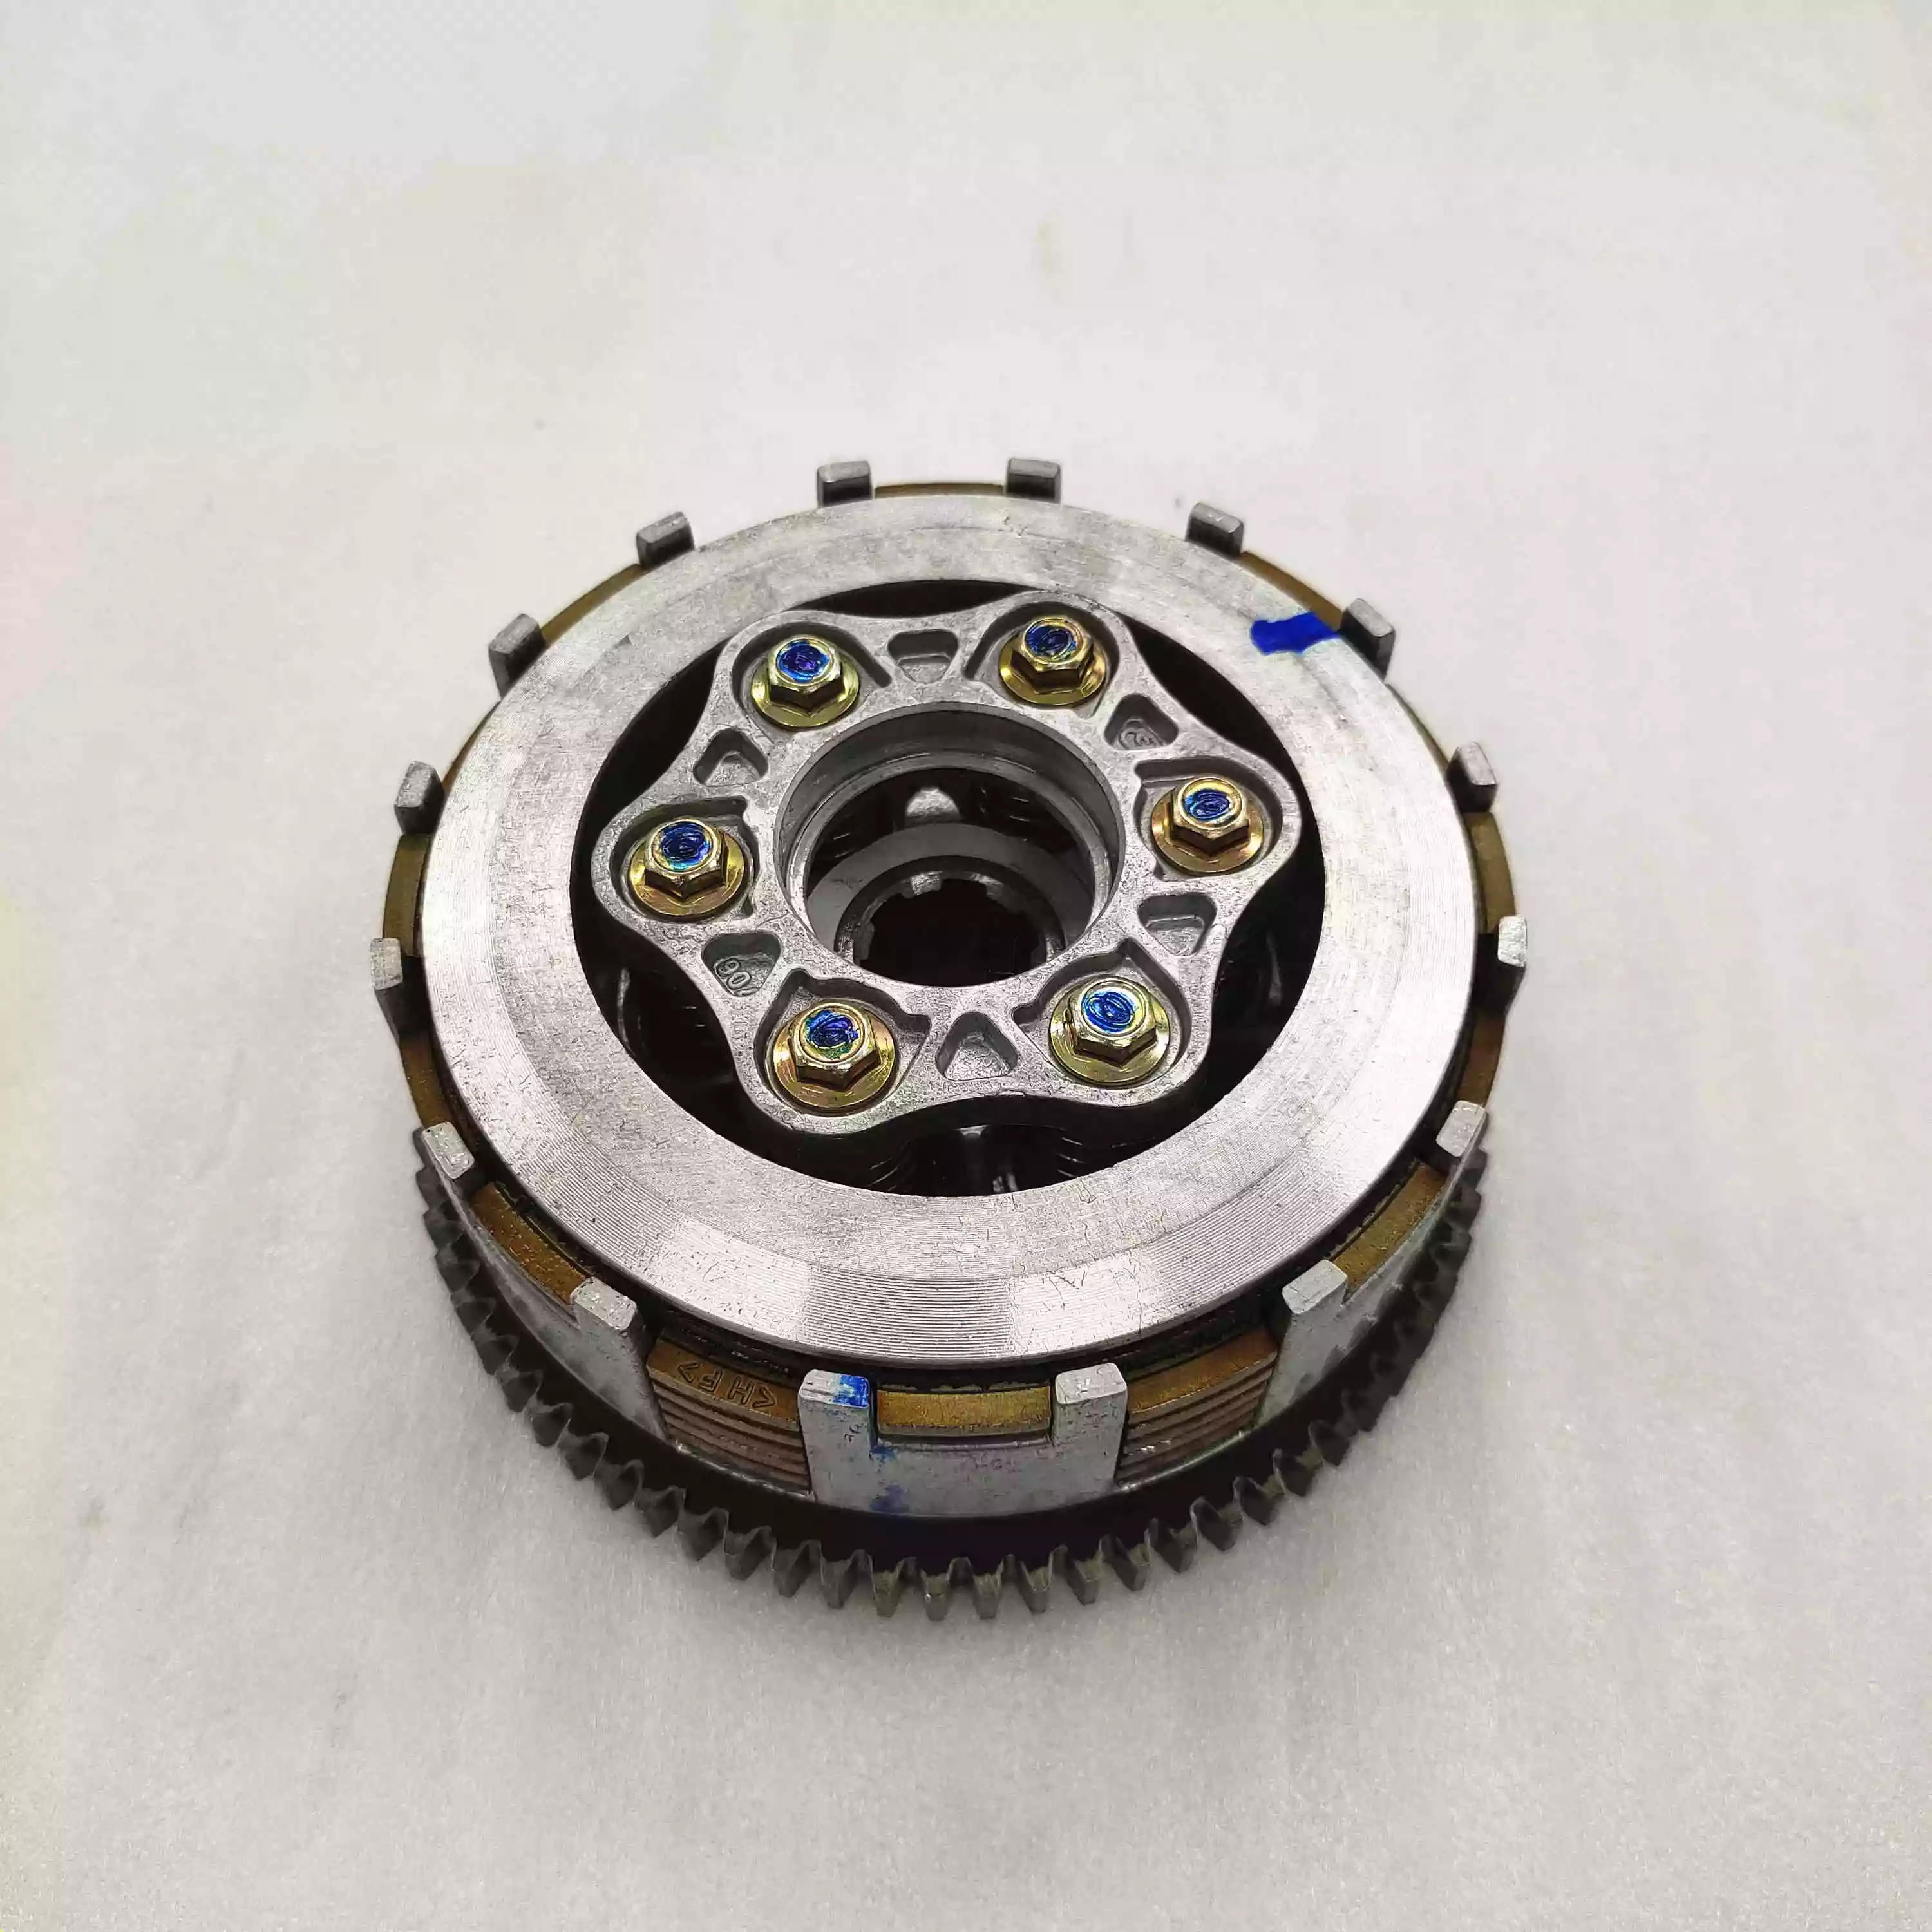 High quality Motorcycle Tricycle LIFAN 150cc engine clutch assembly Clutch plate disc clutch assembly Auto parts truck parts